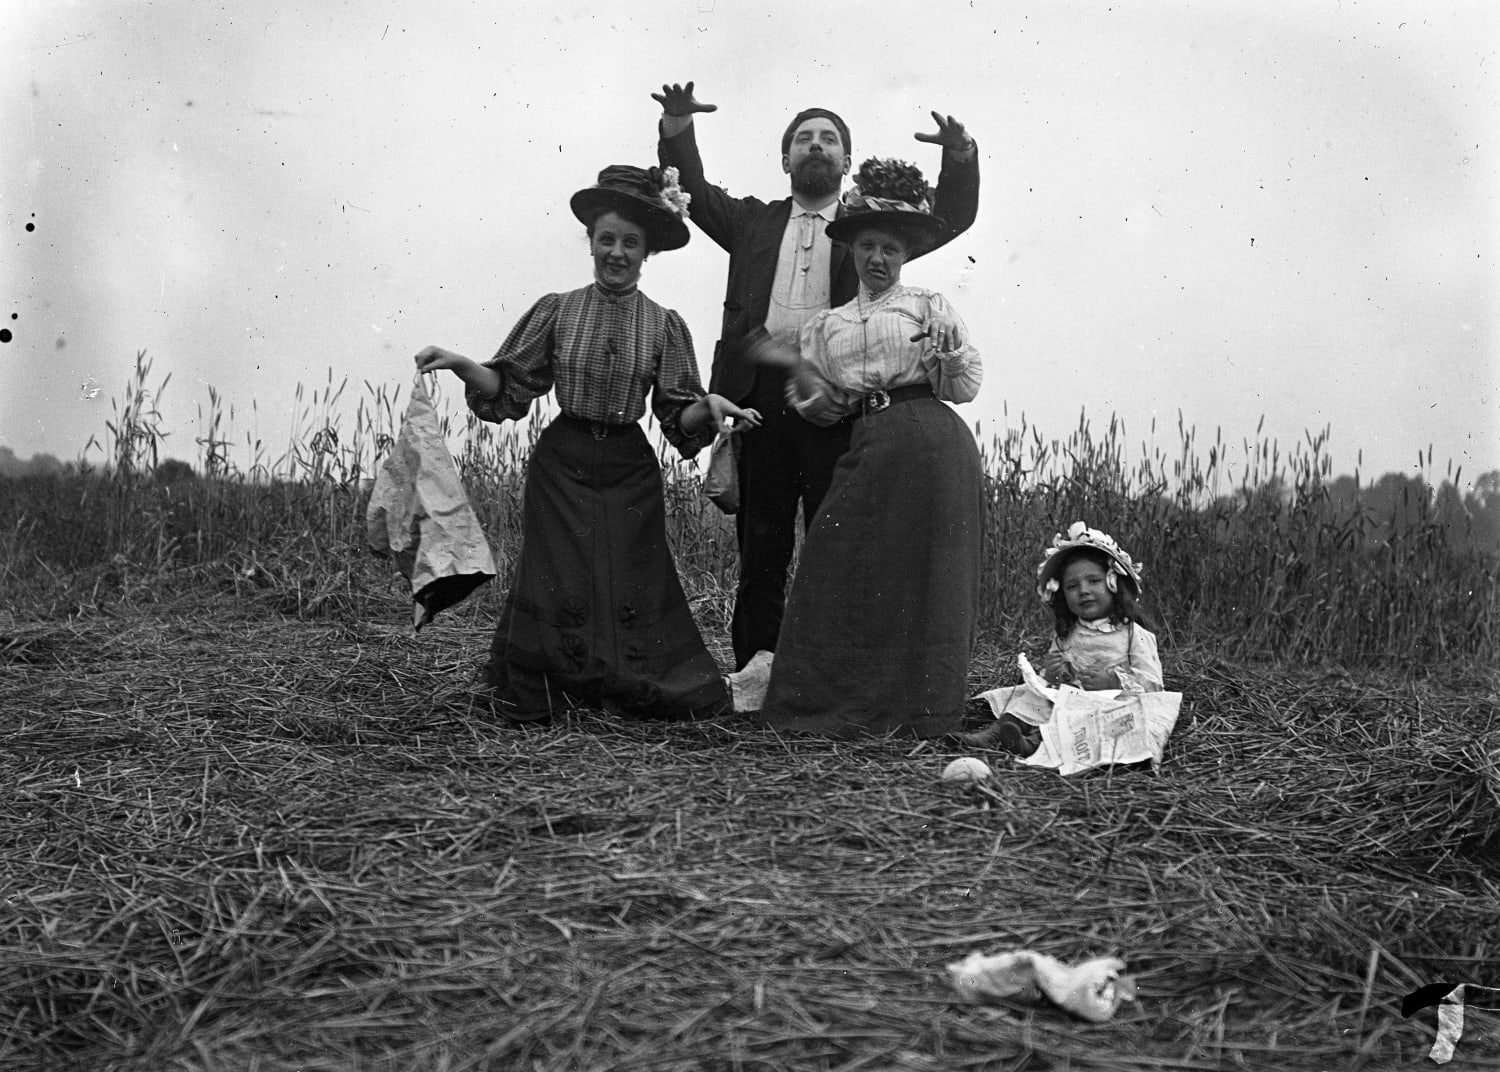 Family Picnic. 1900. France. Glass Negative. *Image My Own*